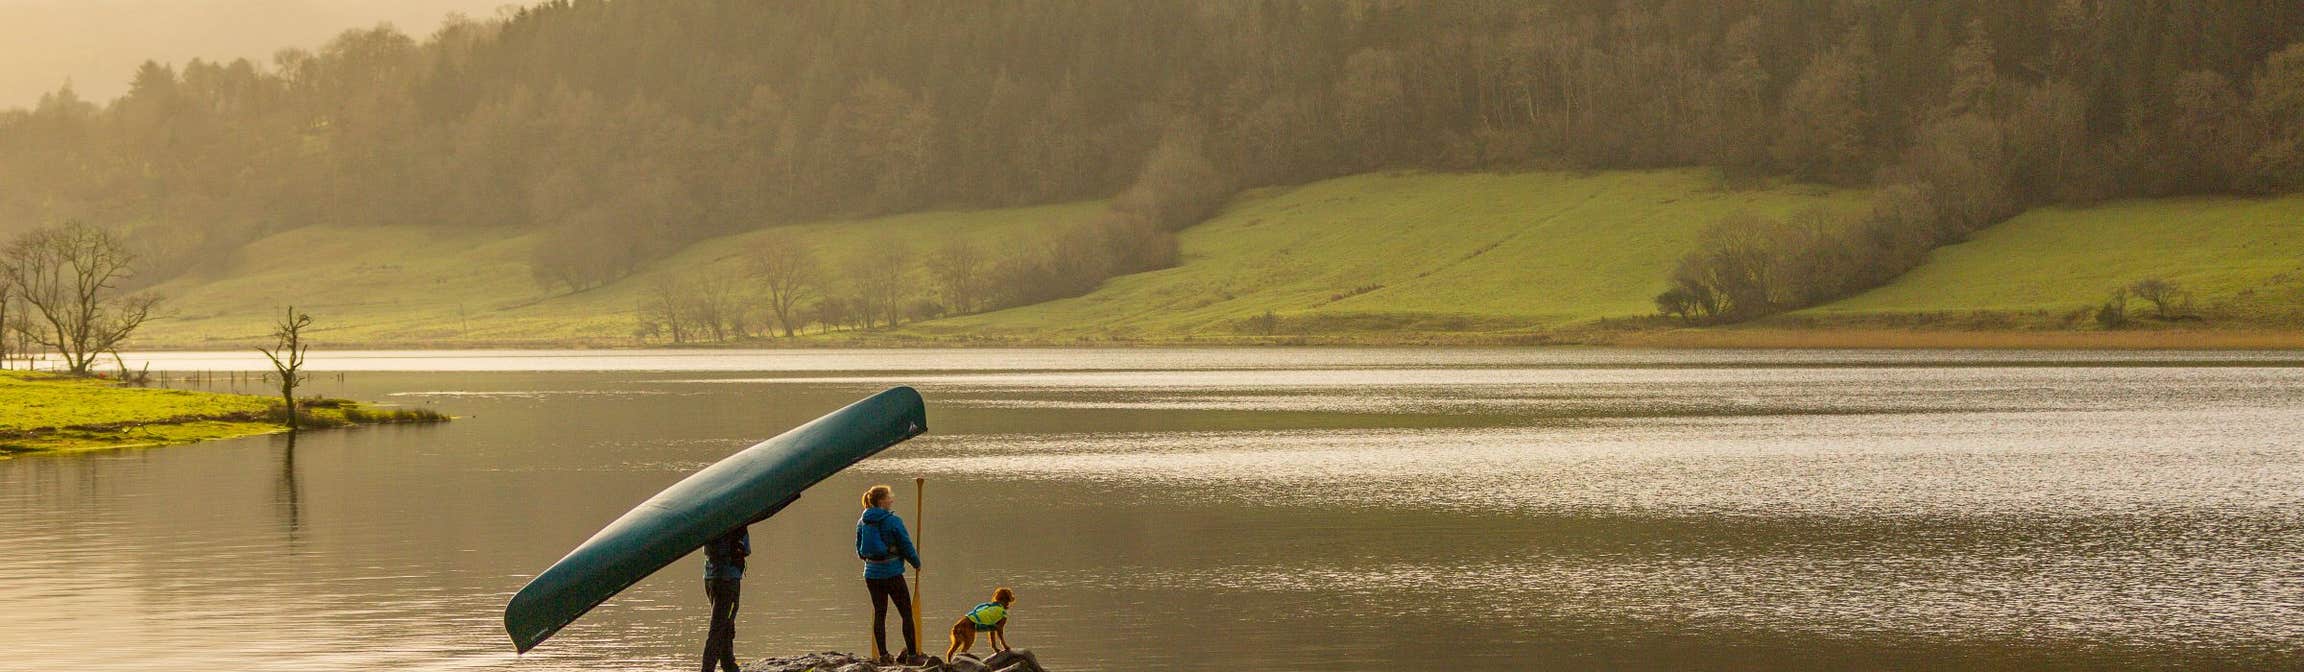 Image of a couple with their dog on Glencar Lake in County Leitrim